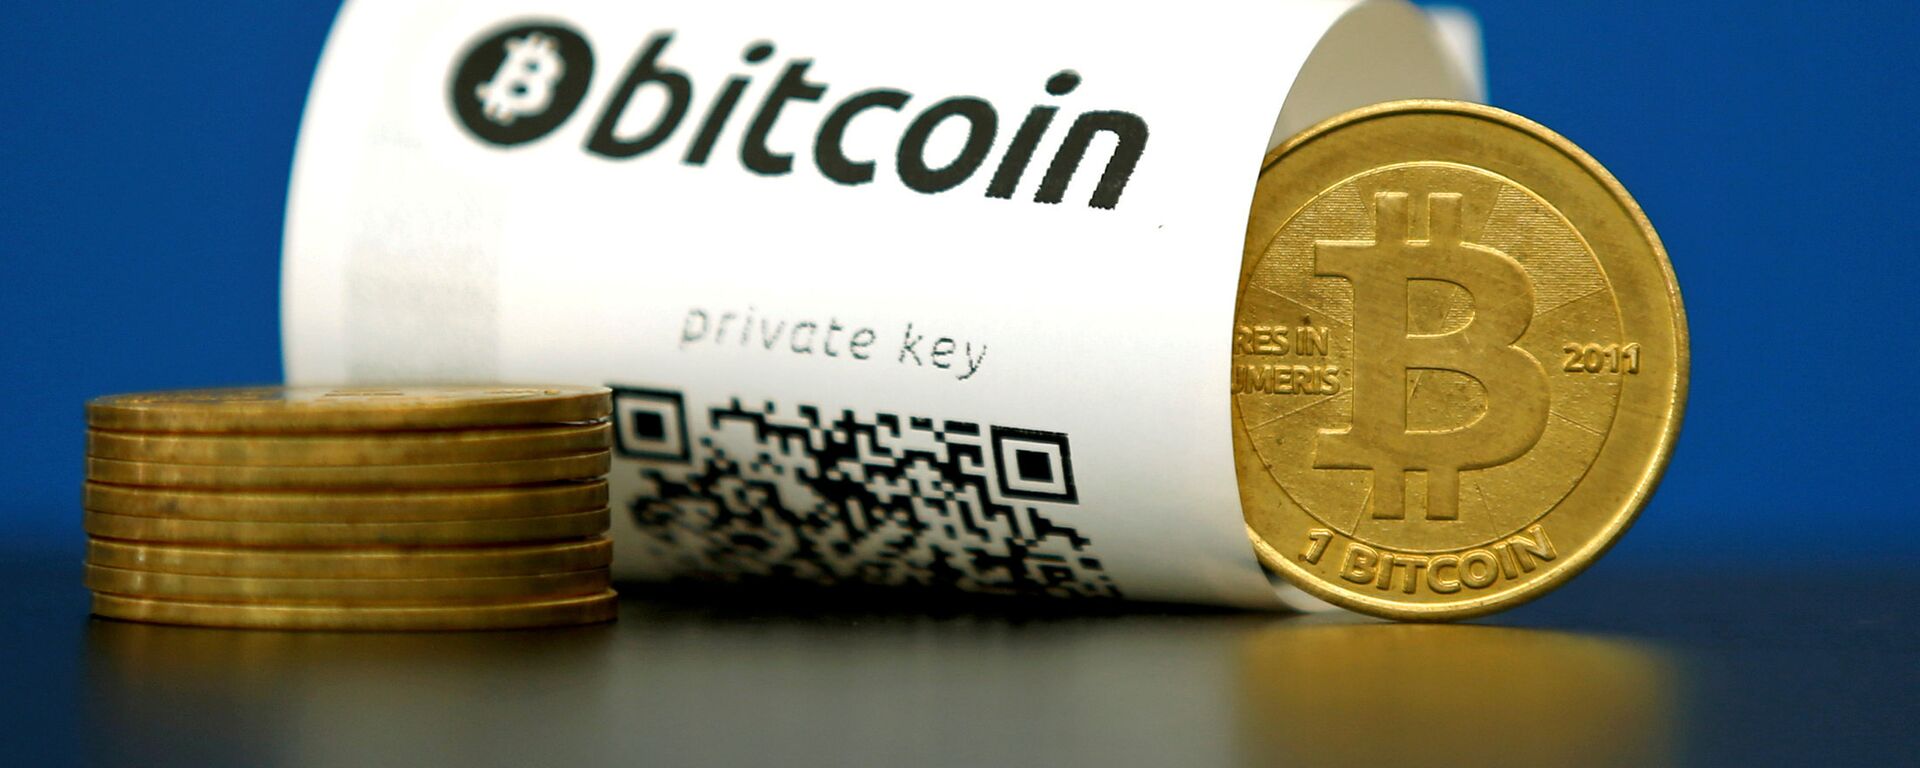 A Bitcoin (virtual currency) paper wallet with QR codes and a coin are seen in an illustration picture taken at La Maison du Bitcoin in Paris, France May 27, 2015 - سبوتنيك عربي, 1920, 12.10.2021